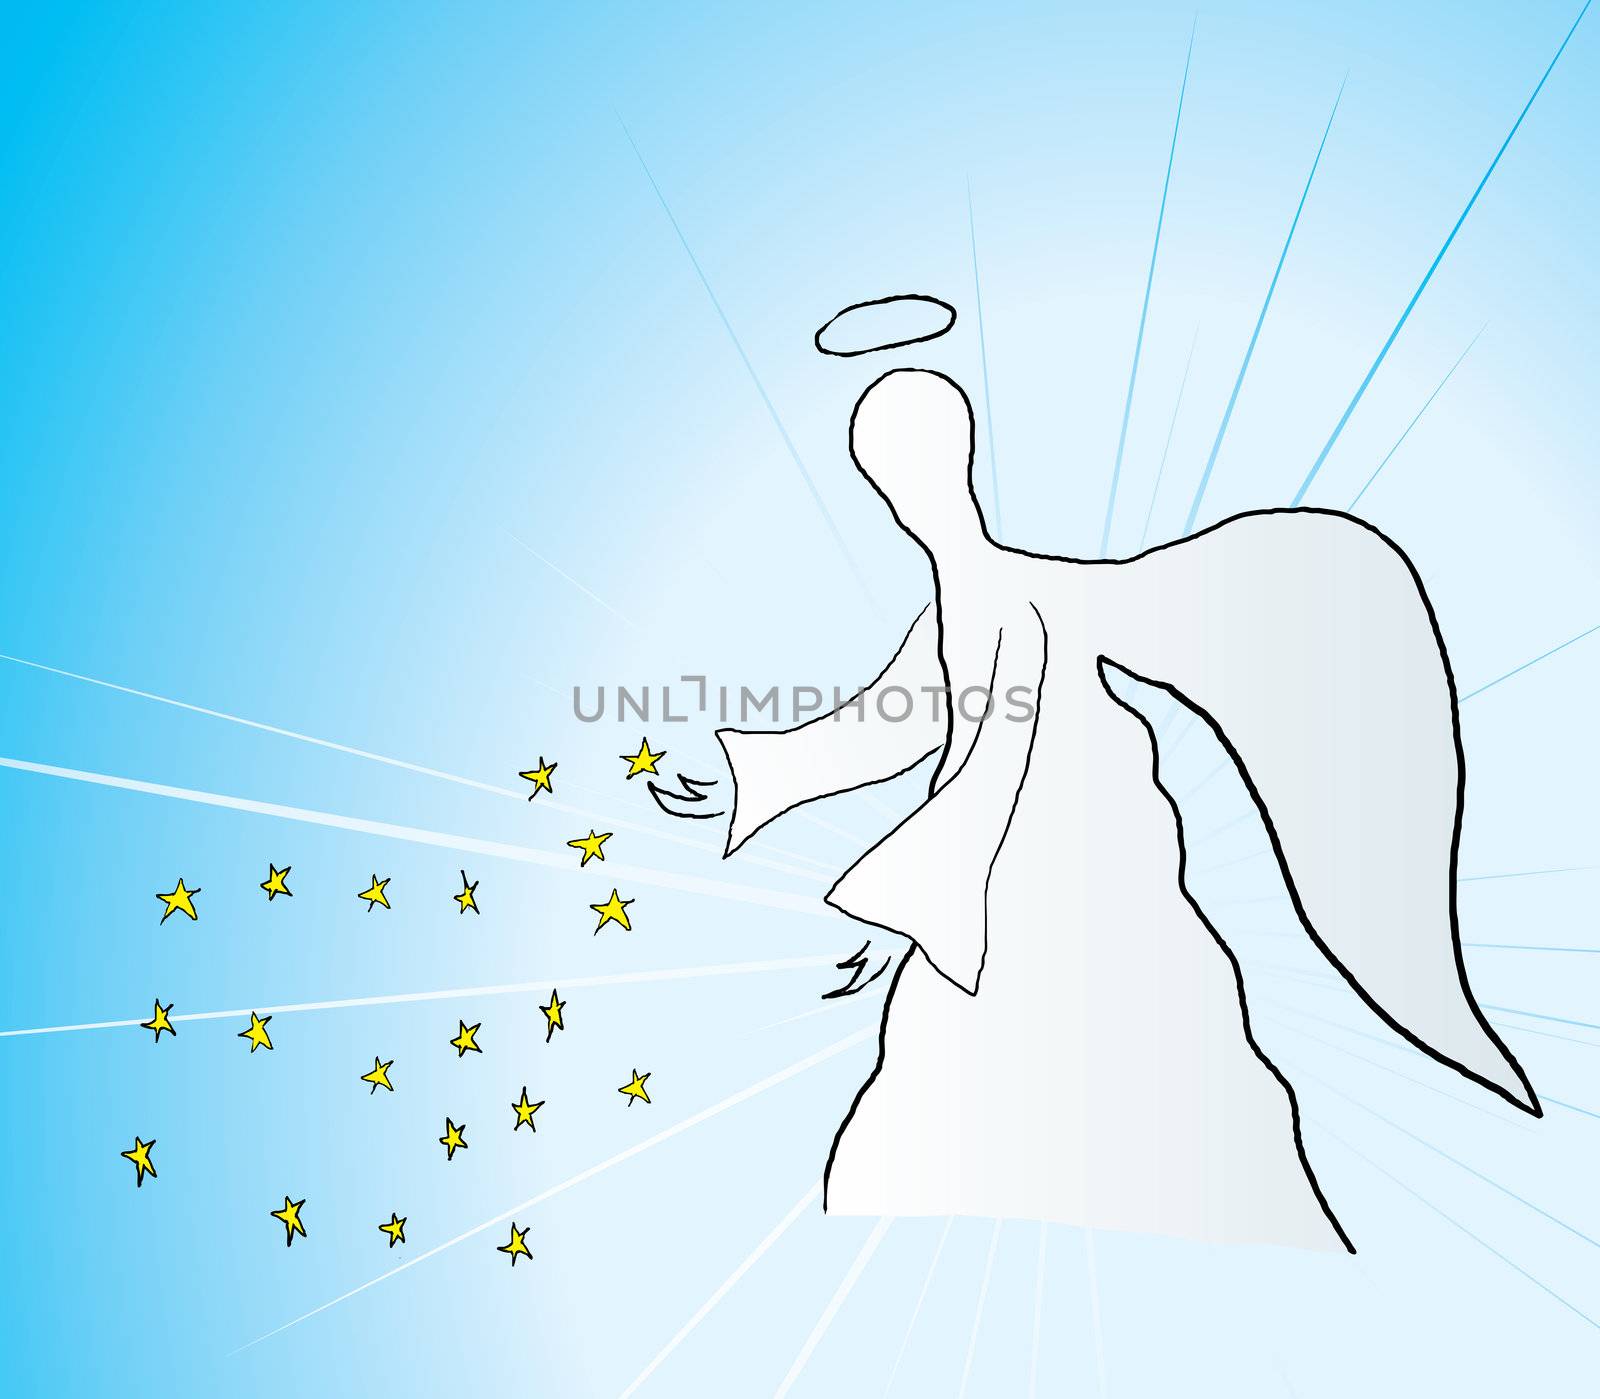 Illustration of blessing angel with stars